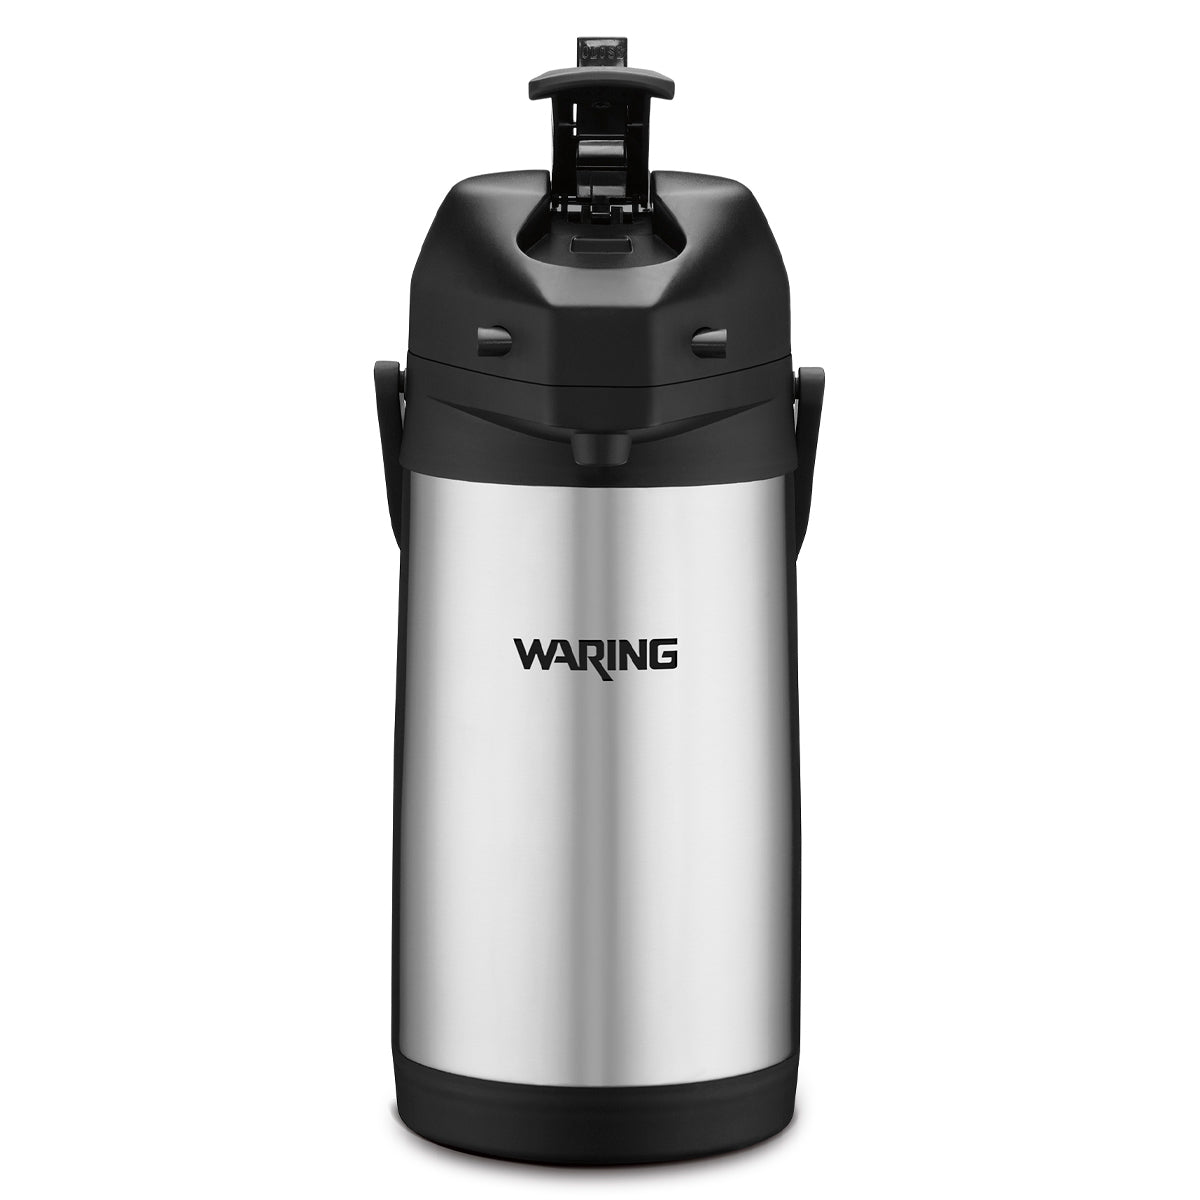 Waring WCU30 30 Cup Commercial Coffee Maker